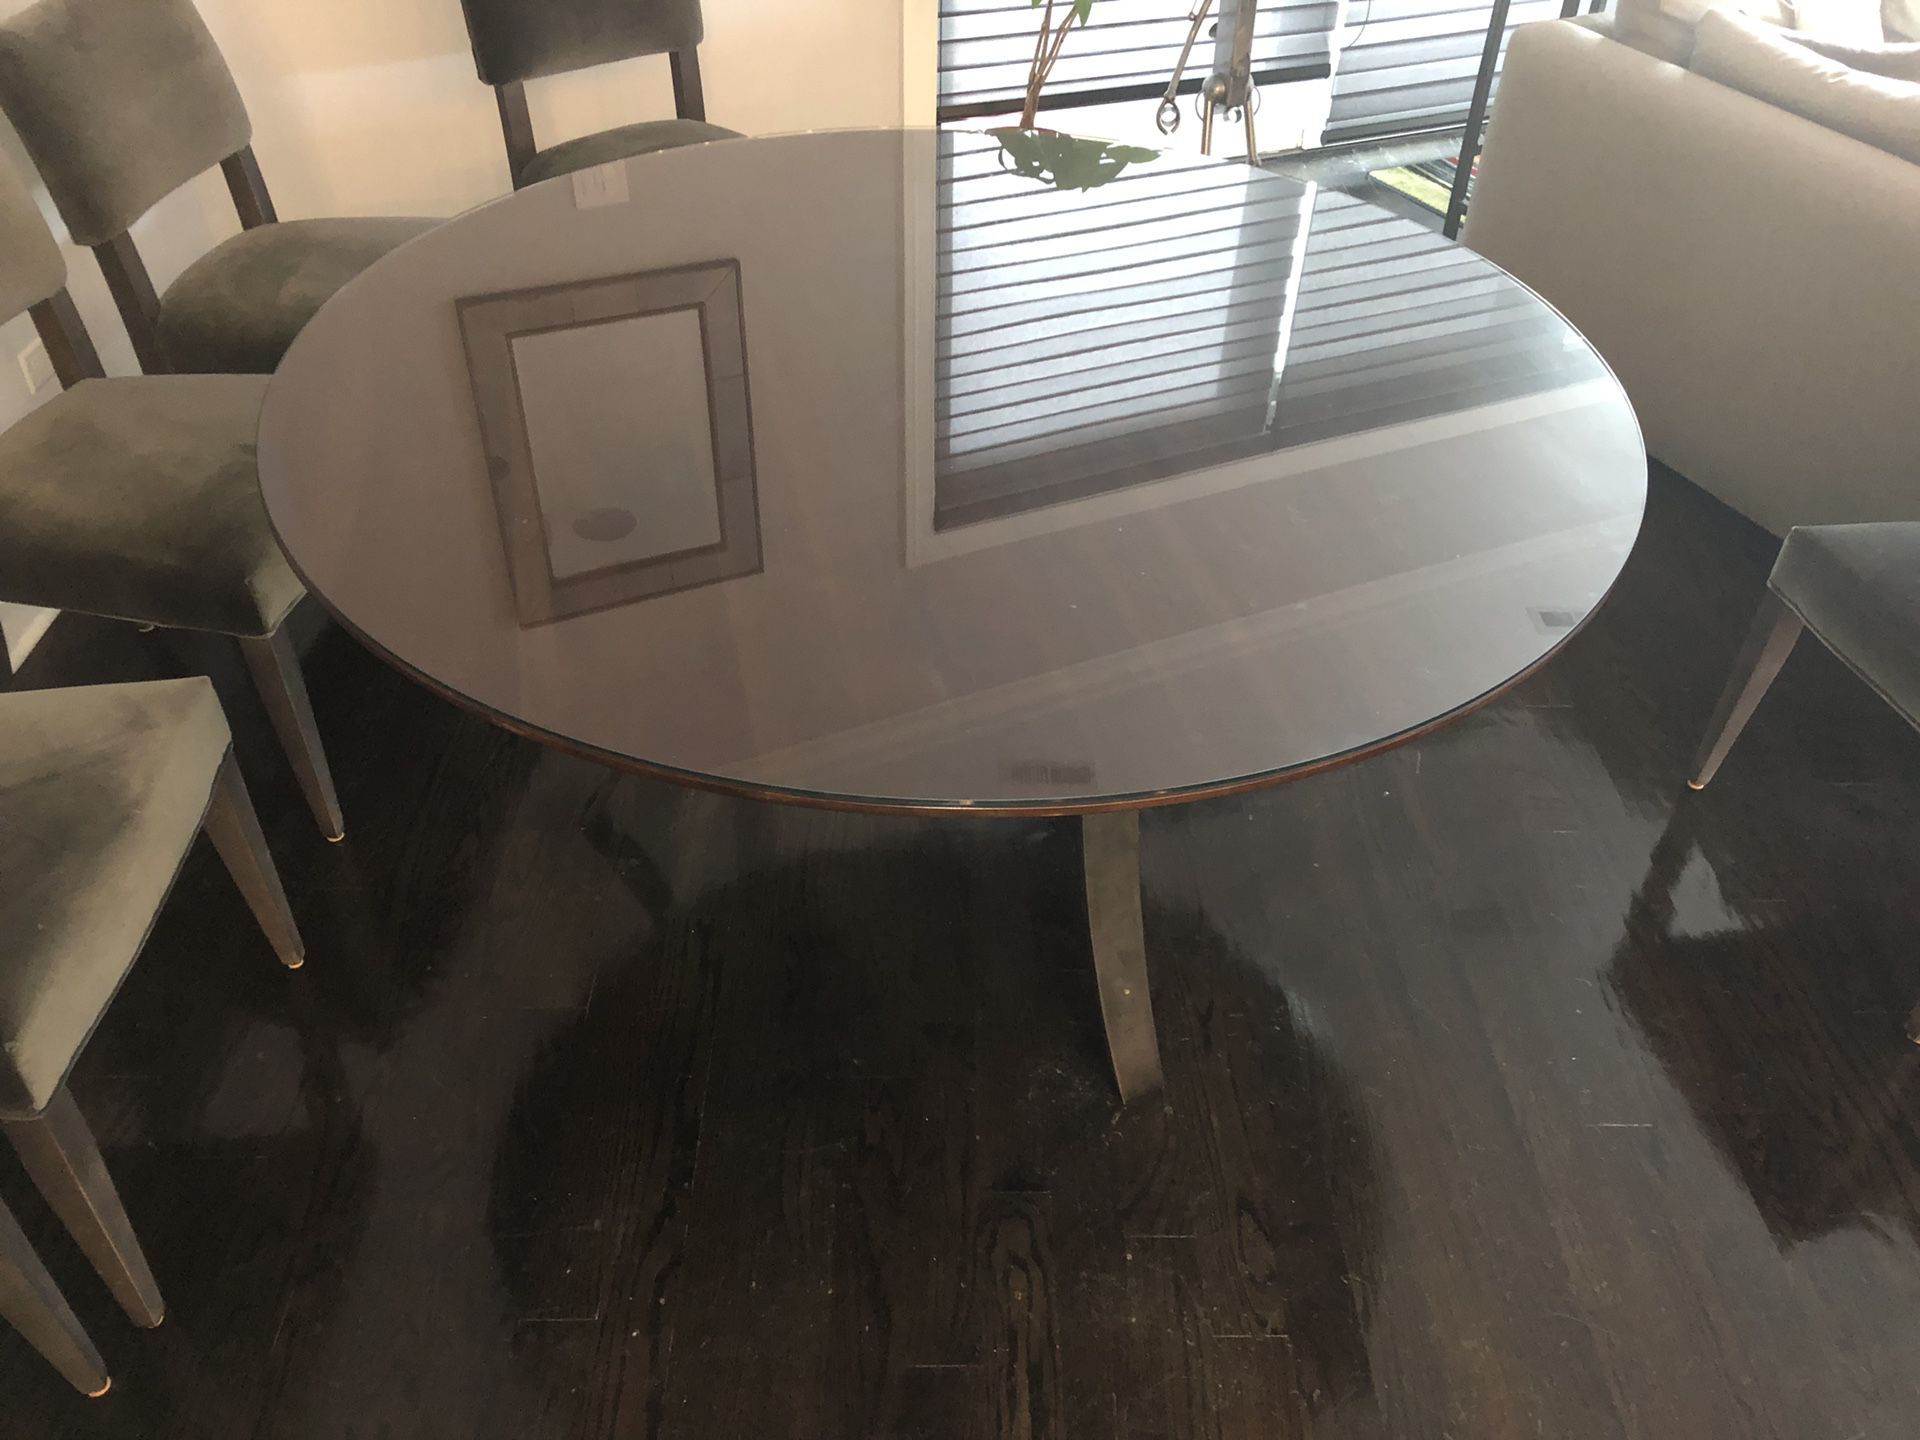 Crate & Barrel Dining Room Table